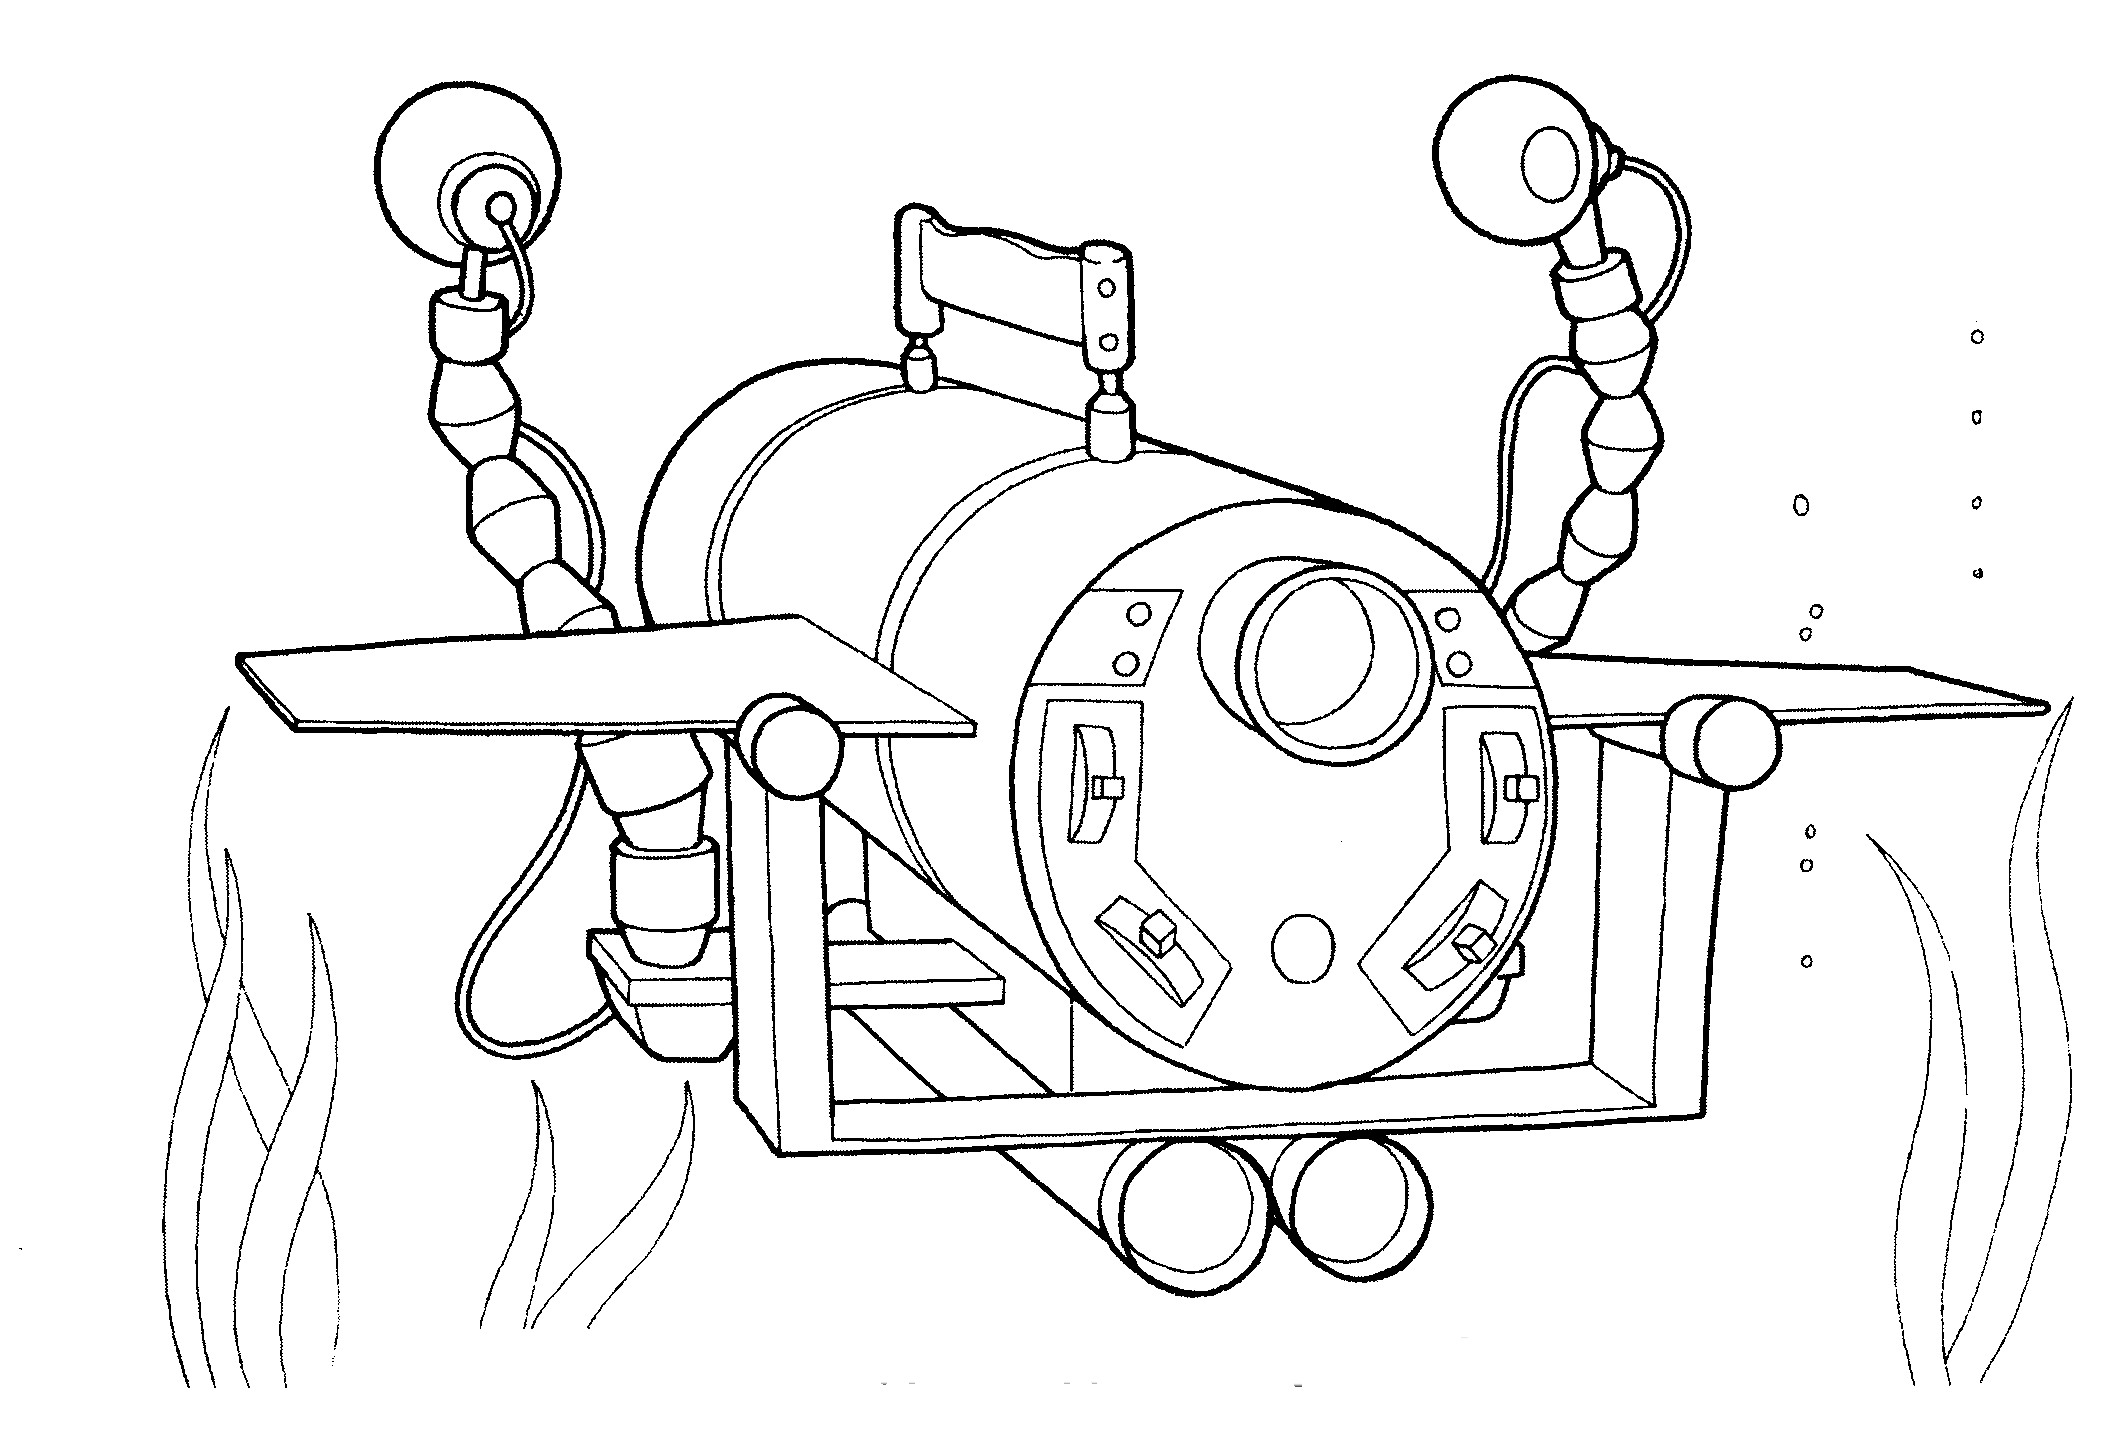 Coloring page - Submersible warehouse